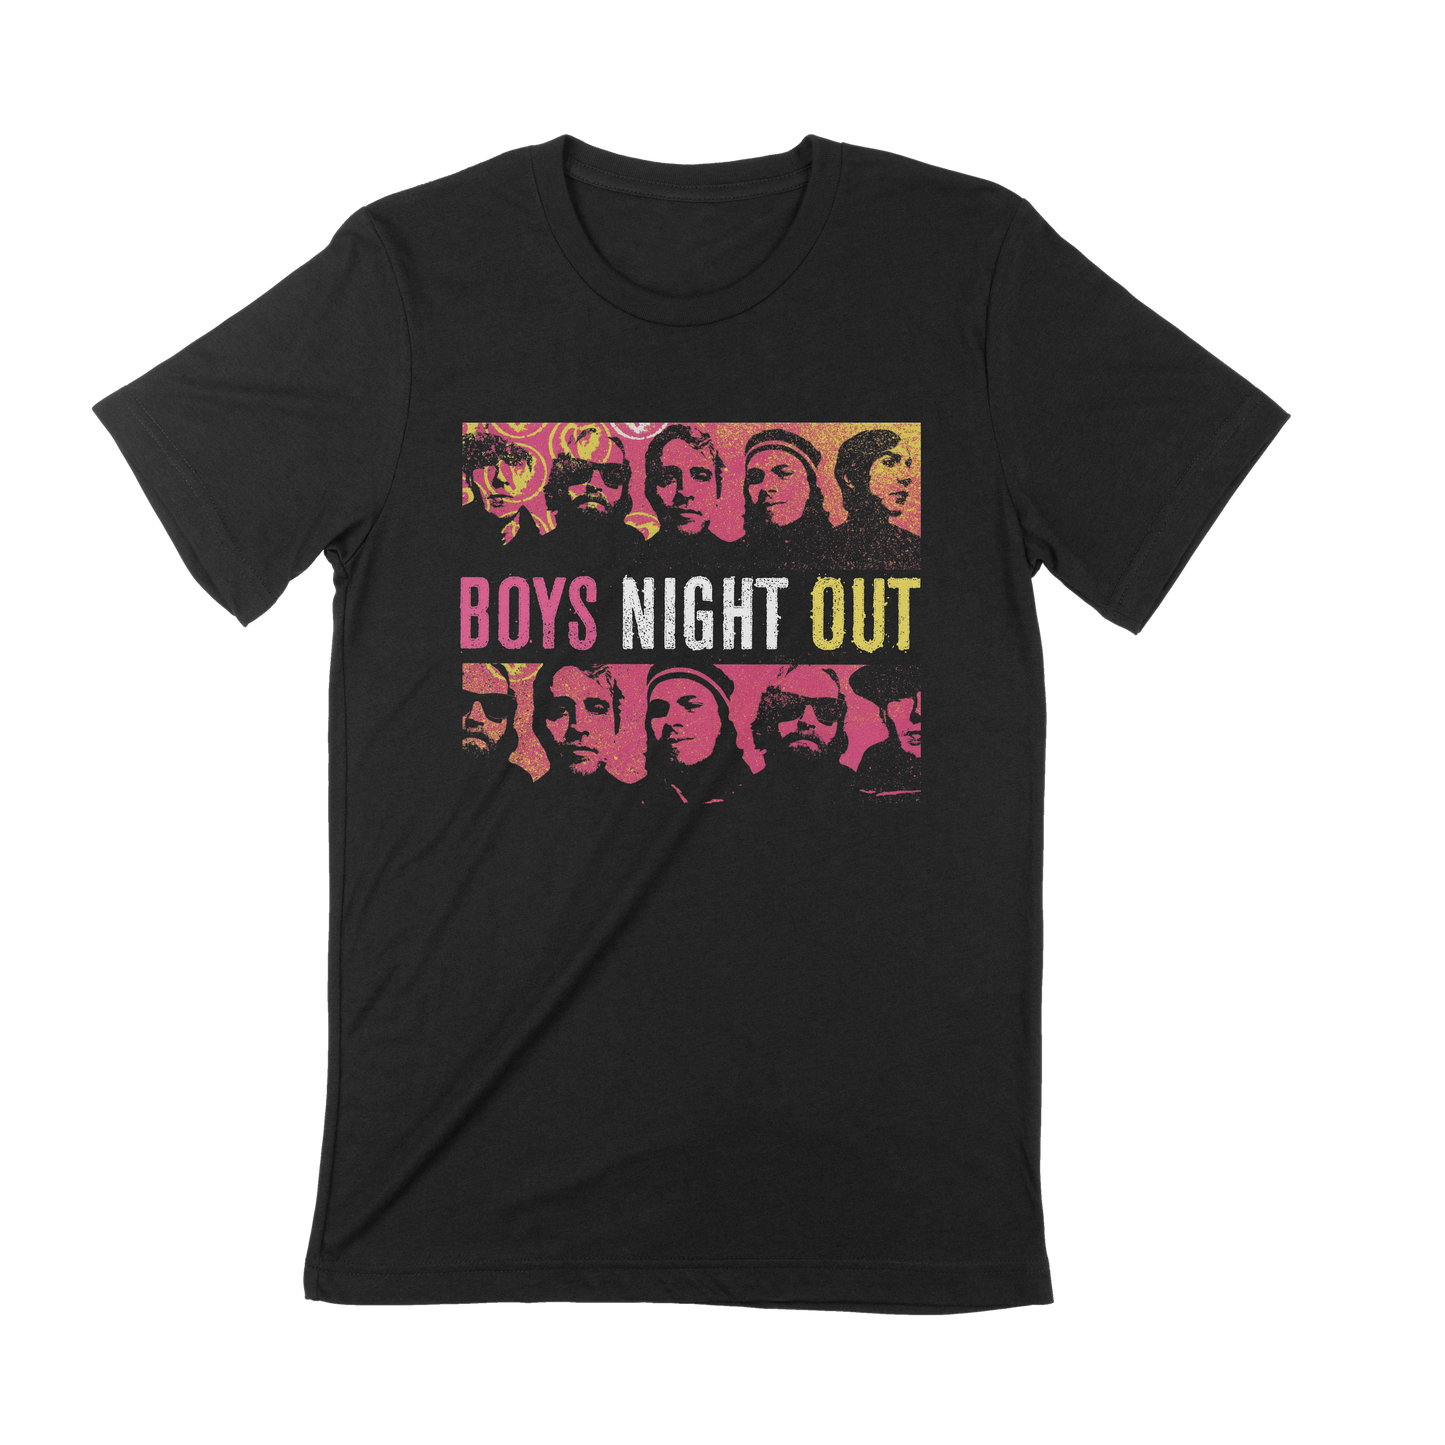 Boys Night Out - "Self-Titled" T-Shirt